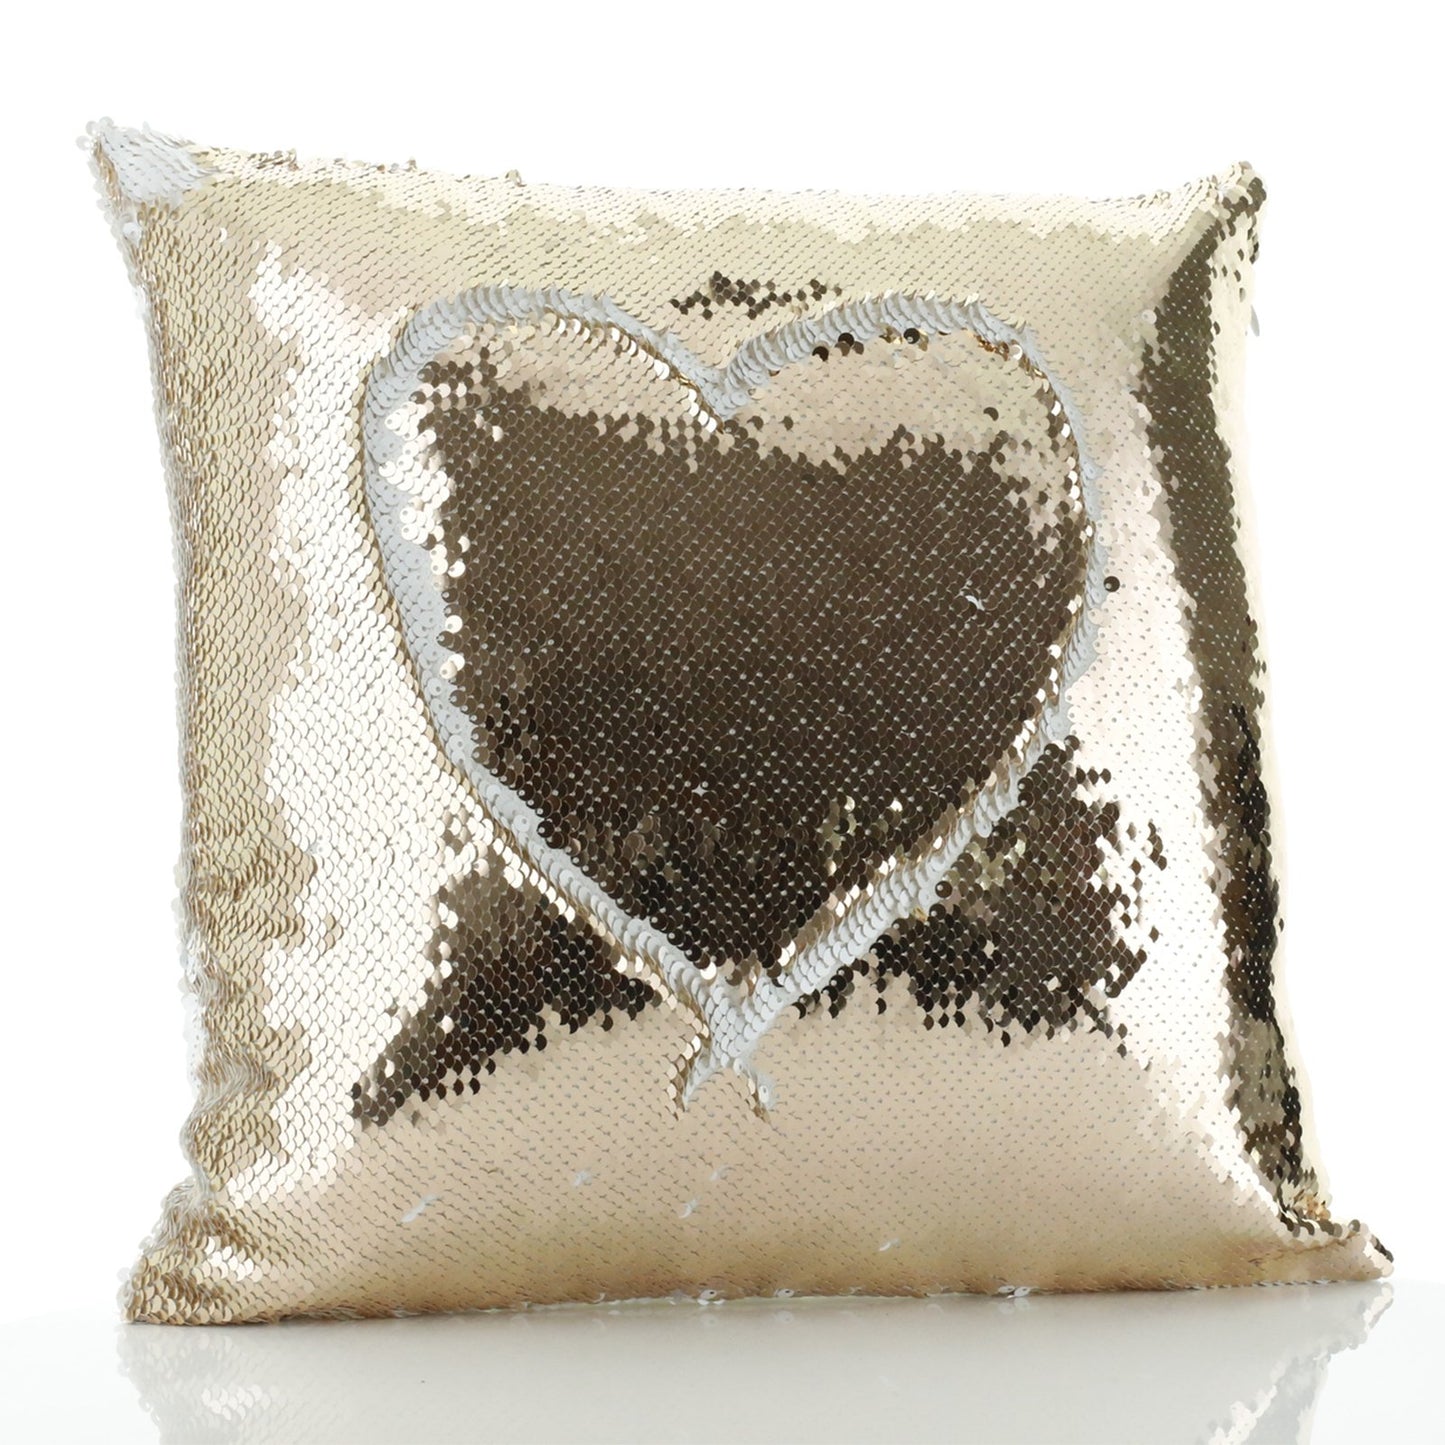 Personalised Sequin Cushion with Cute Text and Dancing Mouse Ballerina